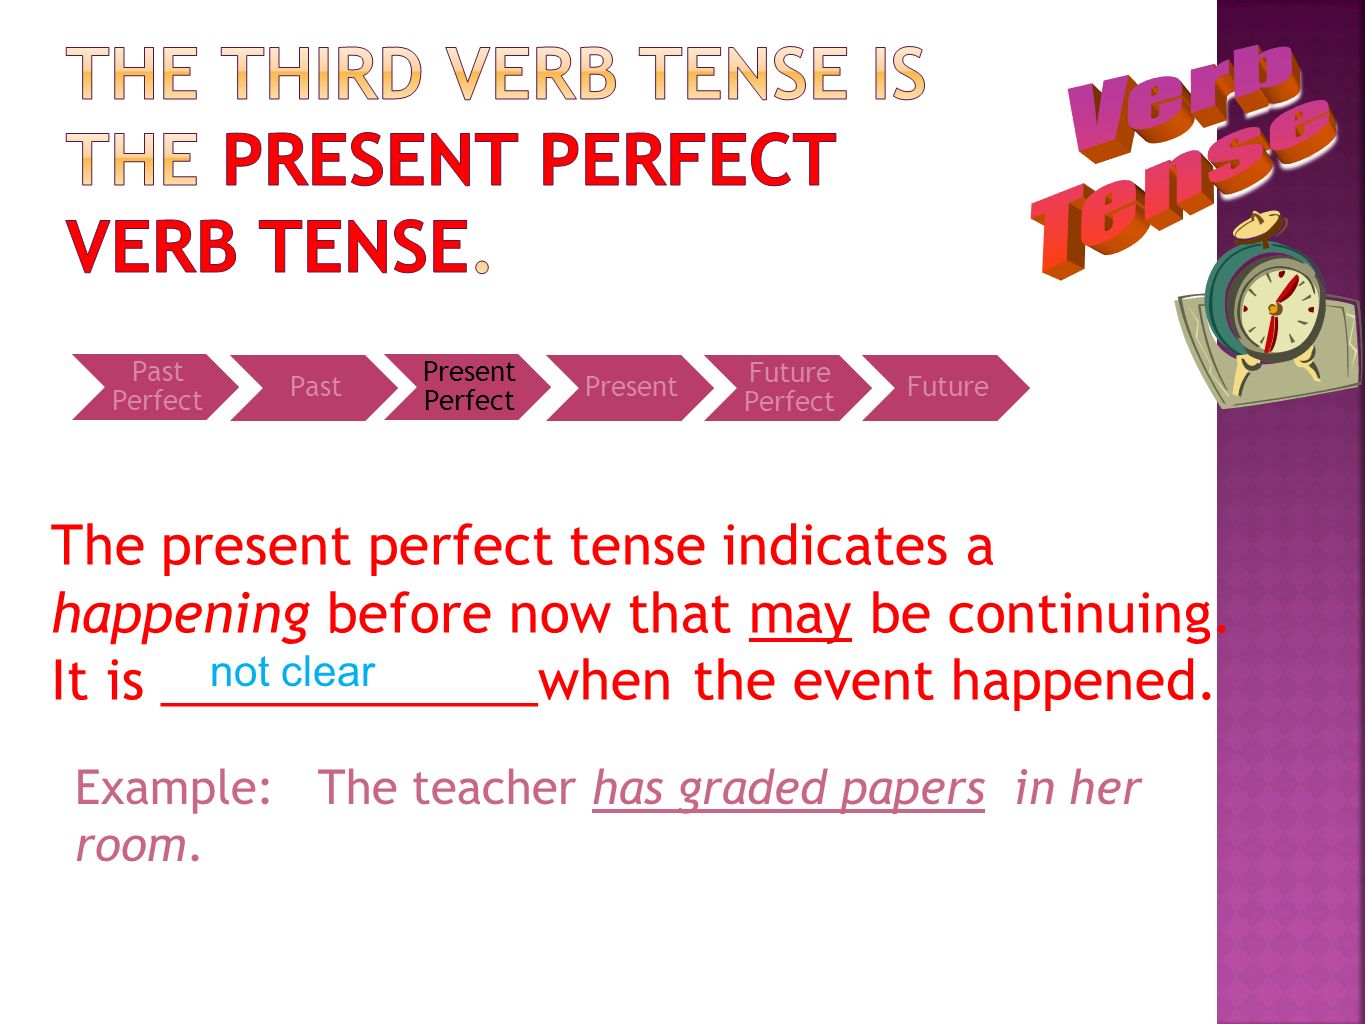 The third verb tense is the present perfect verb tense.